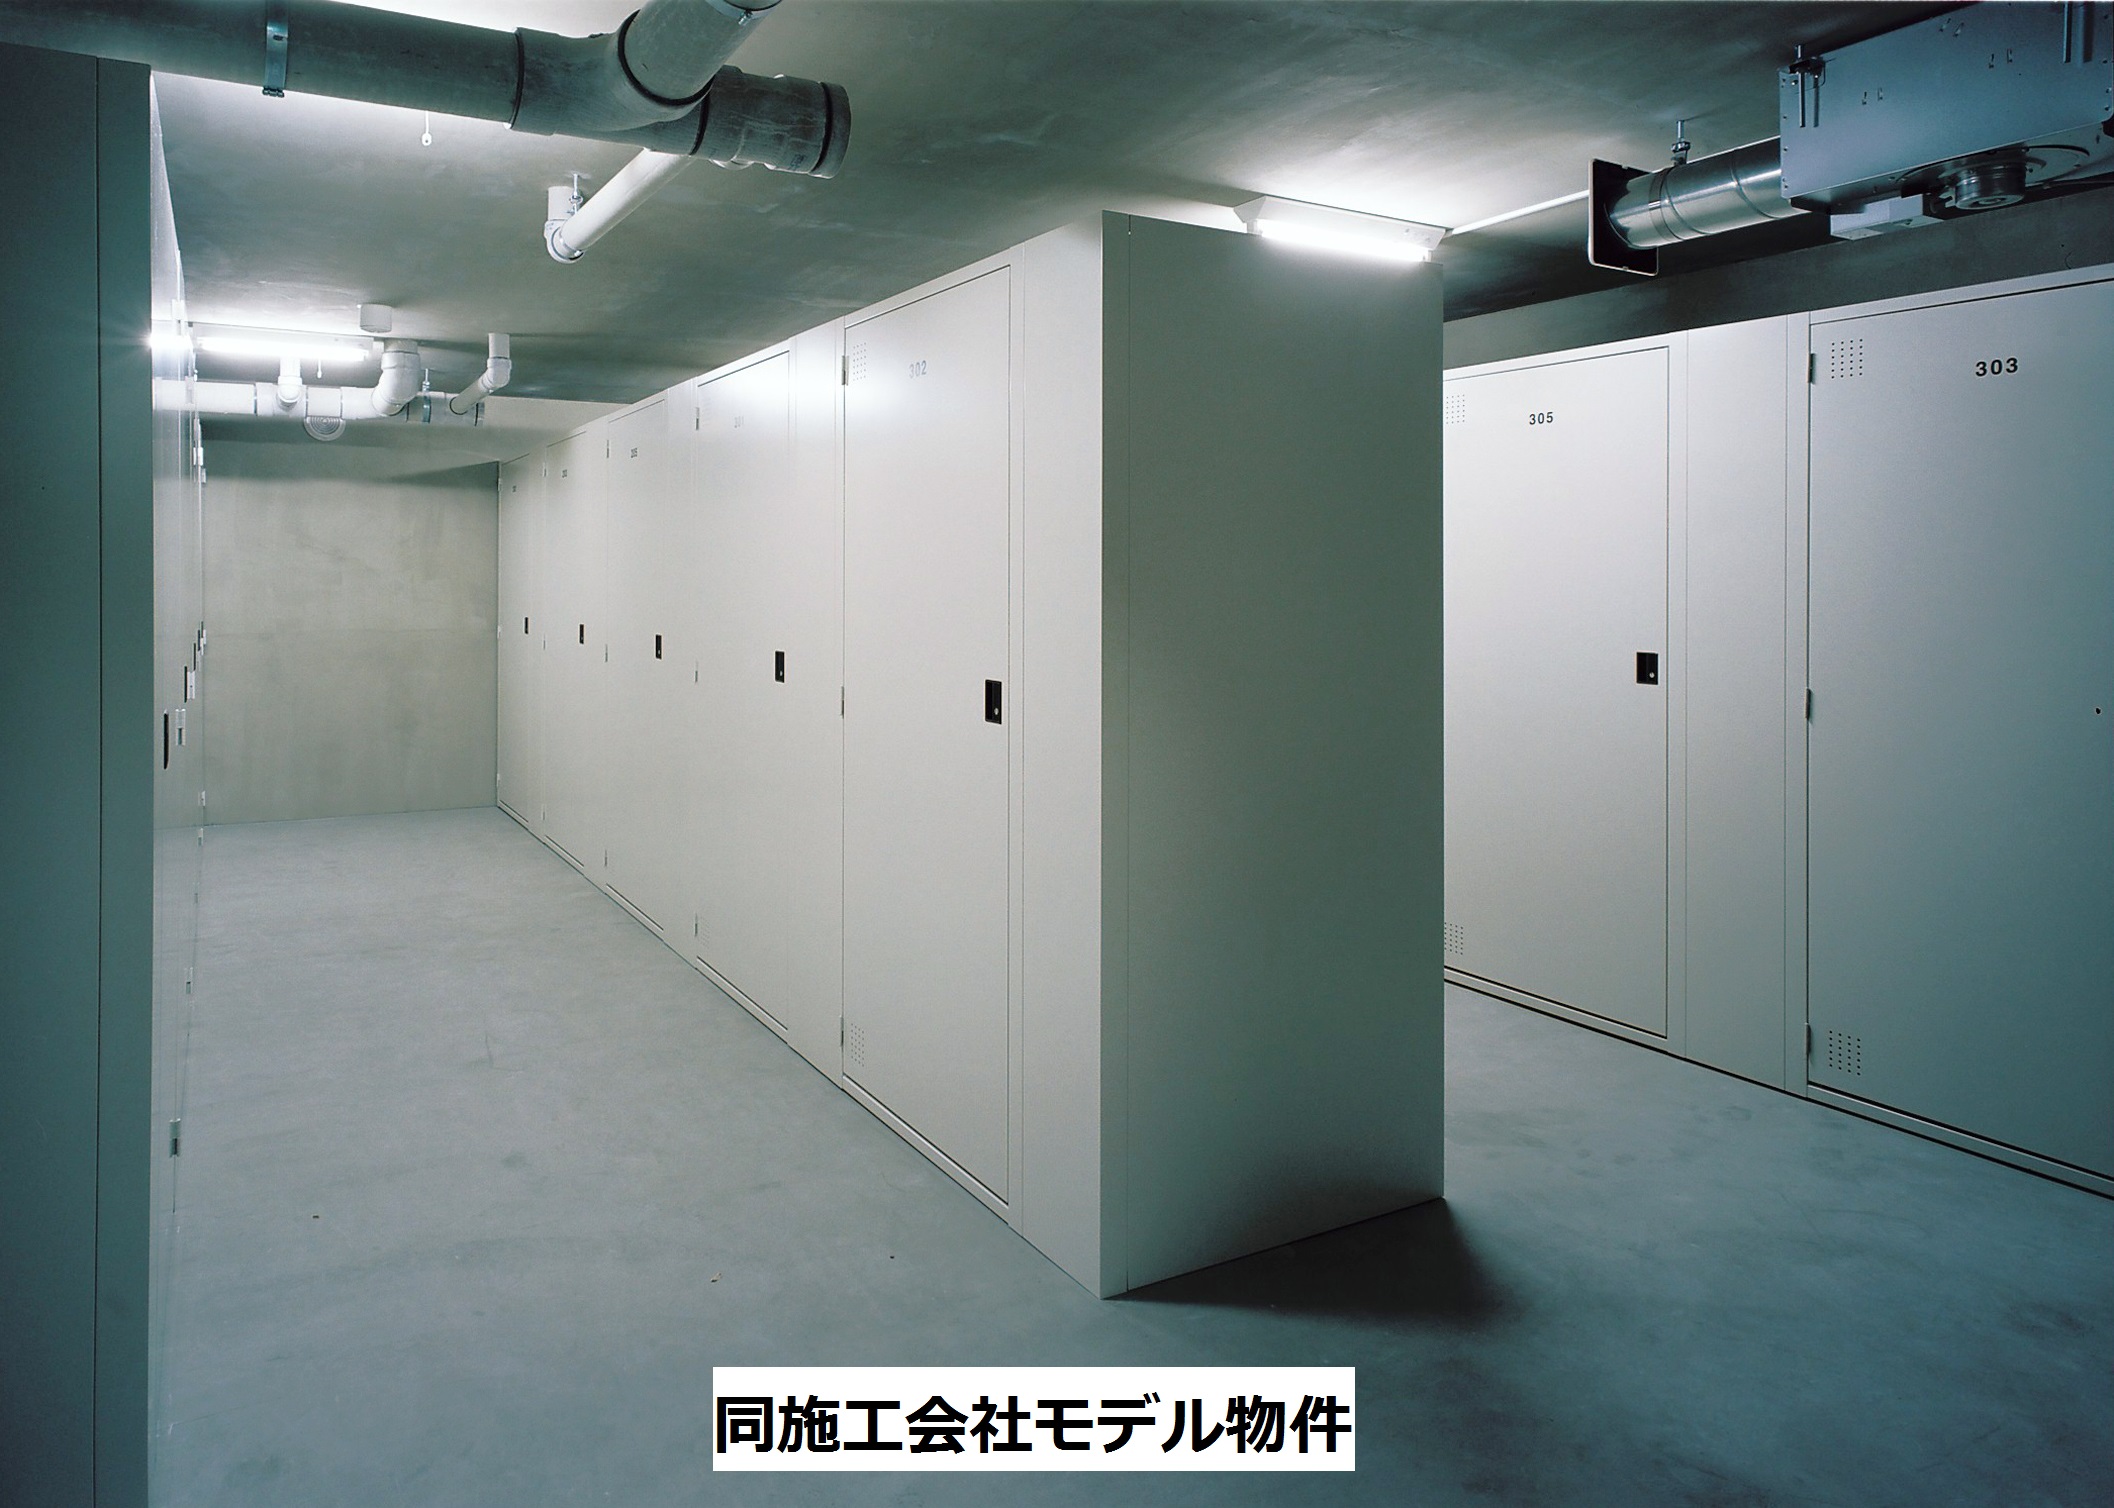 Other common areas. Underground trunk room Same construction company model properties